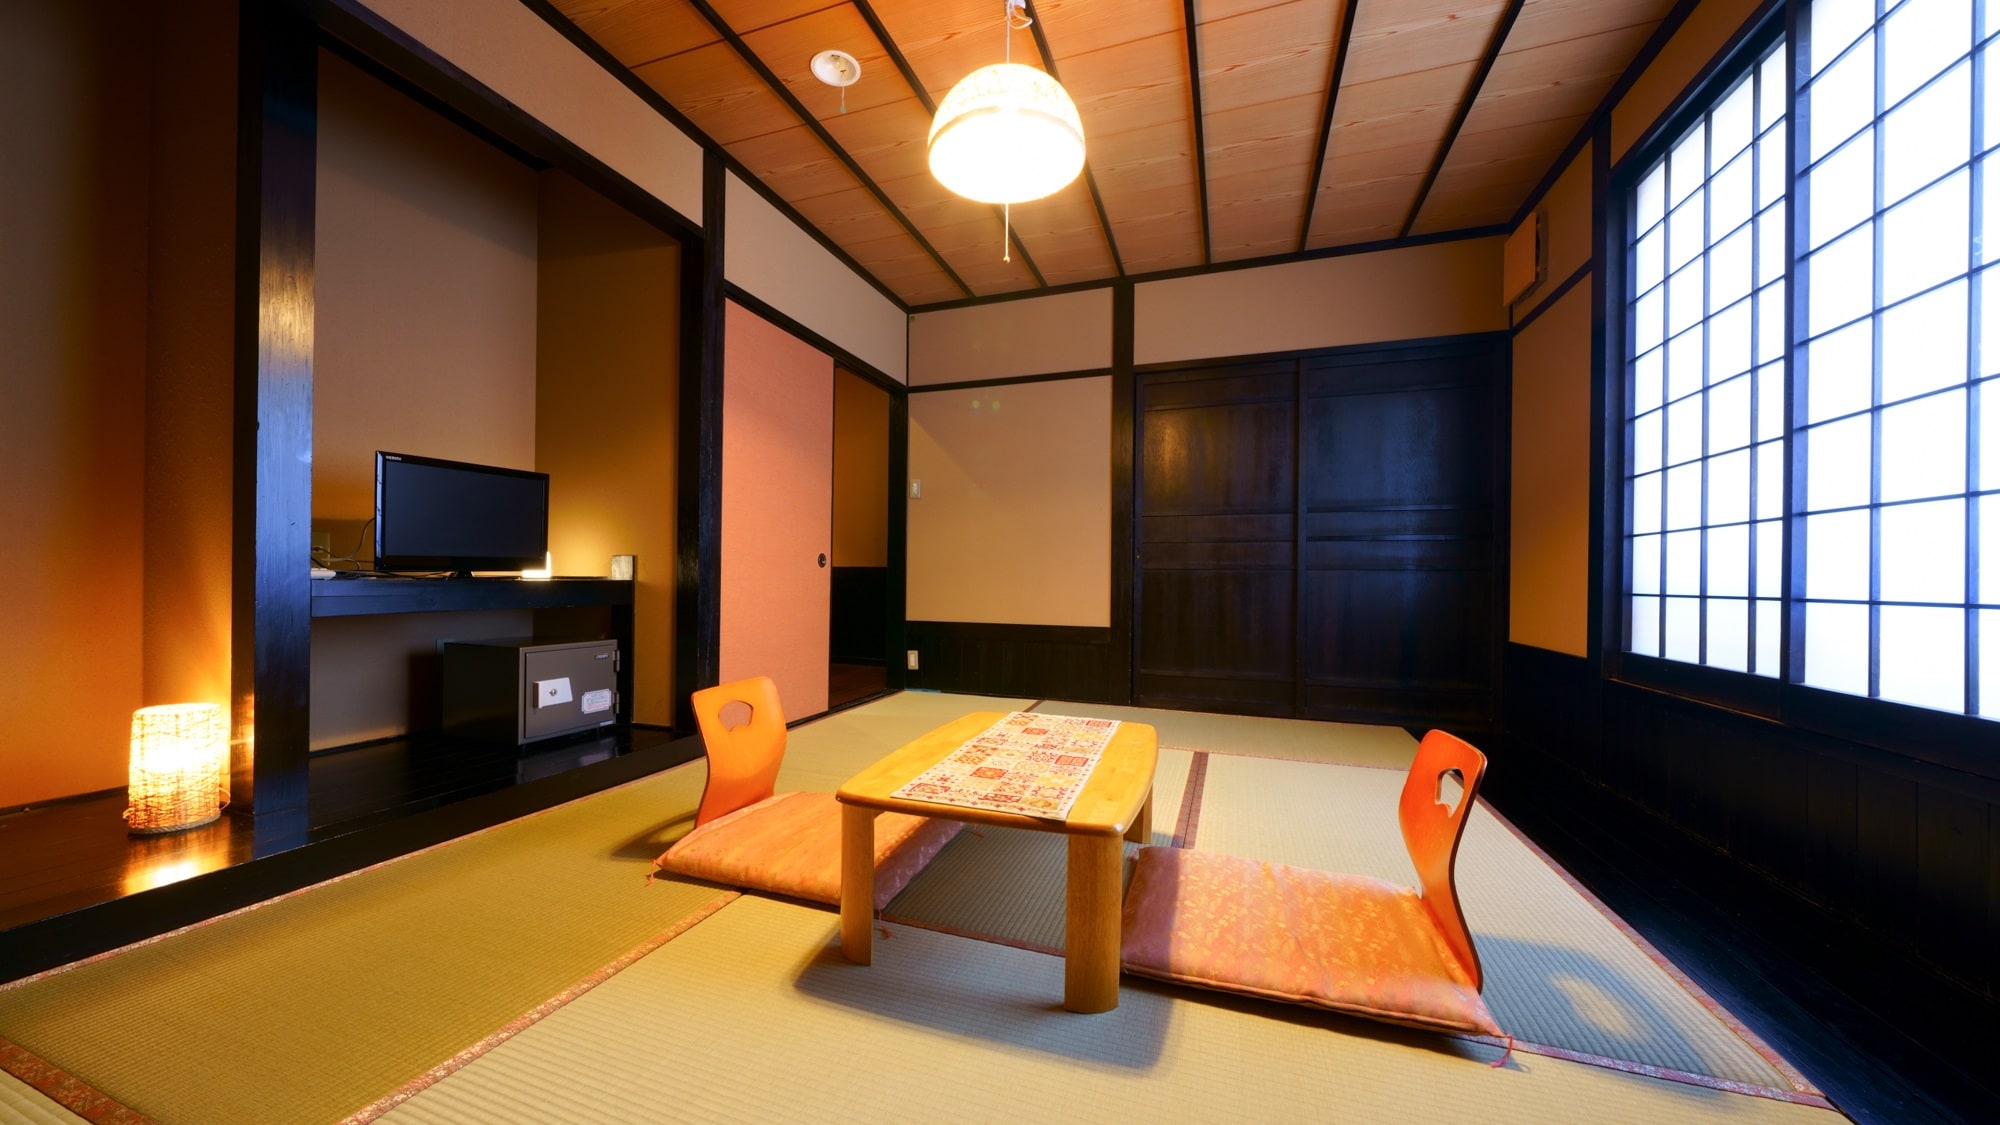 An example of a traditional Japanese style room